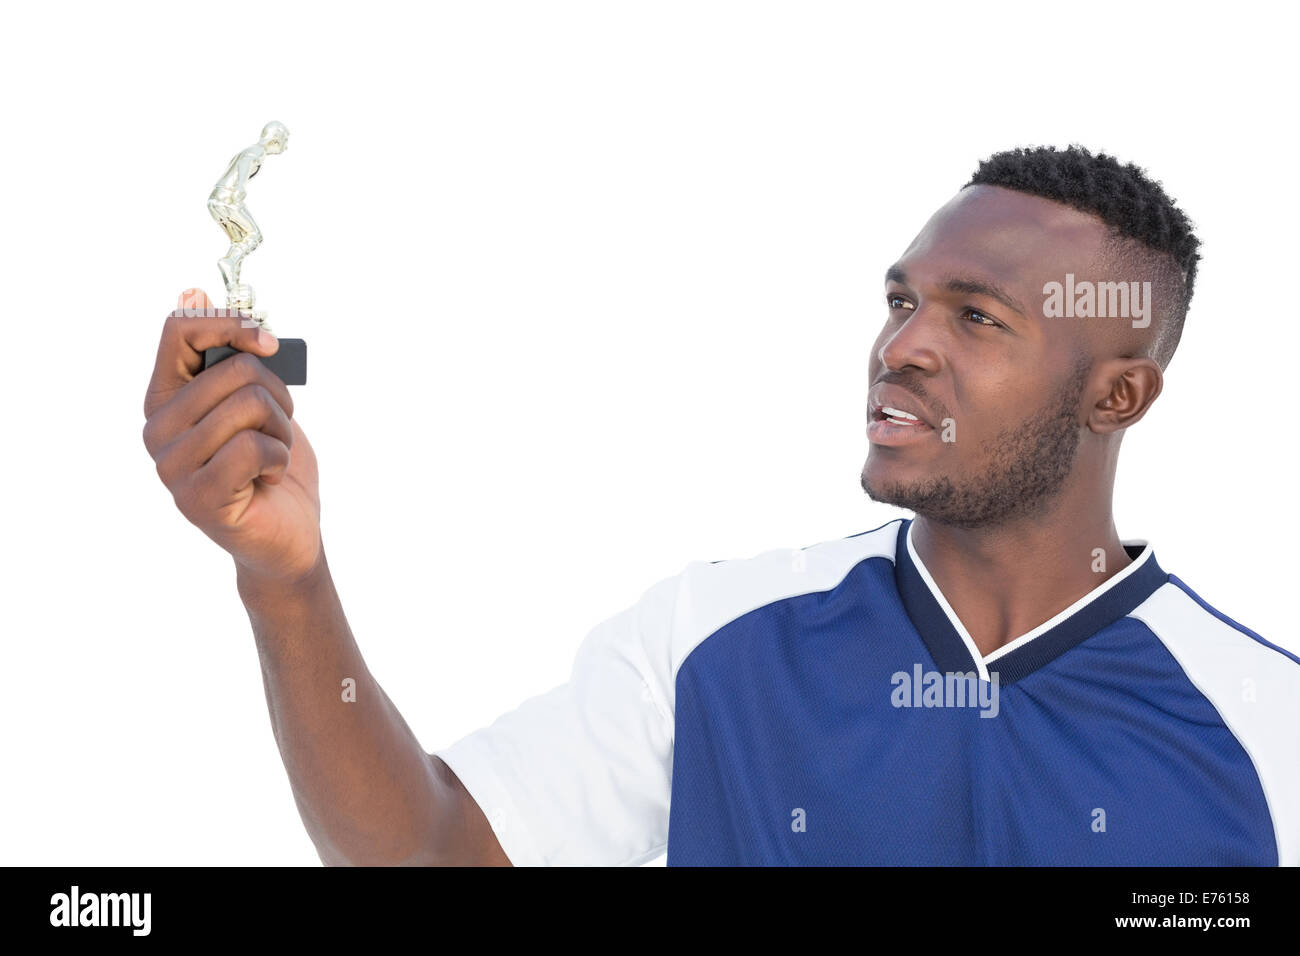 Football player holding winners trophy Stock Photo